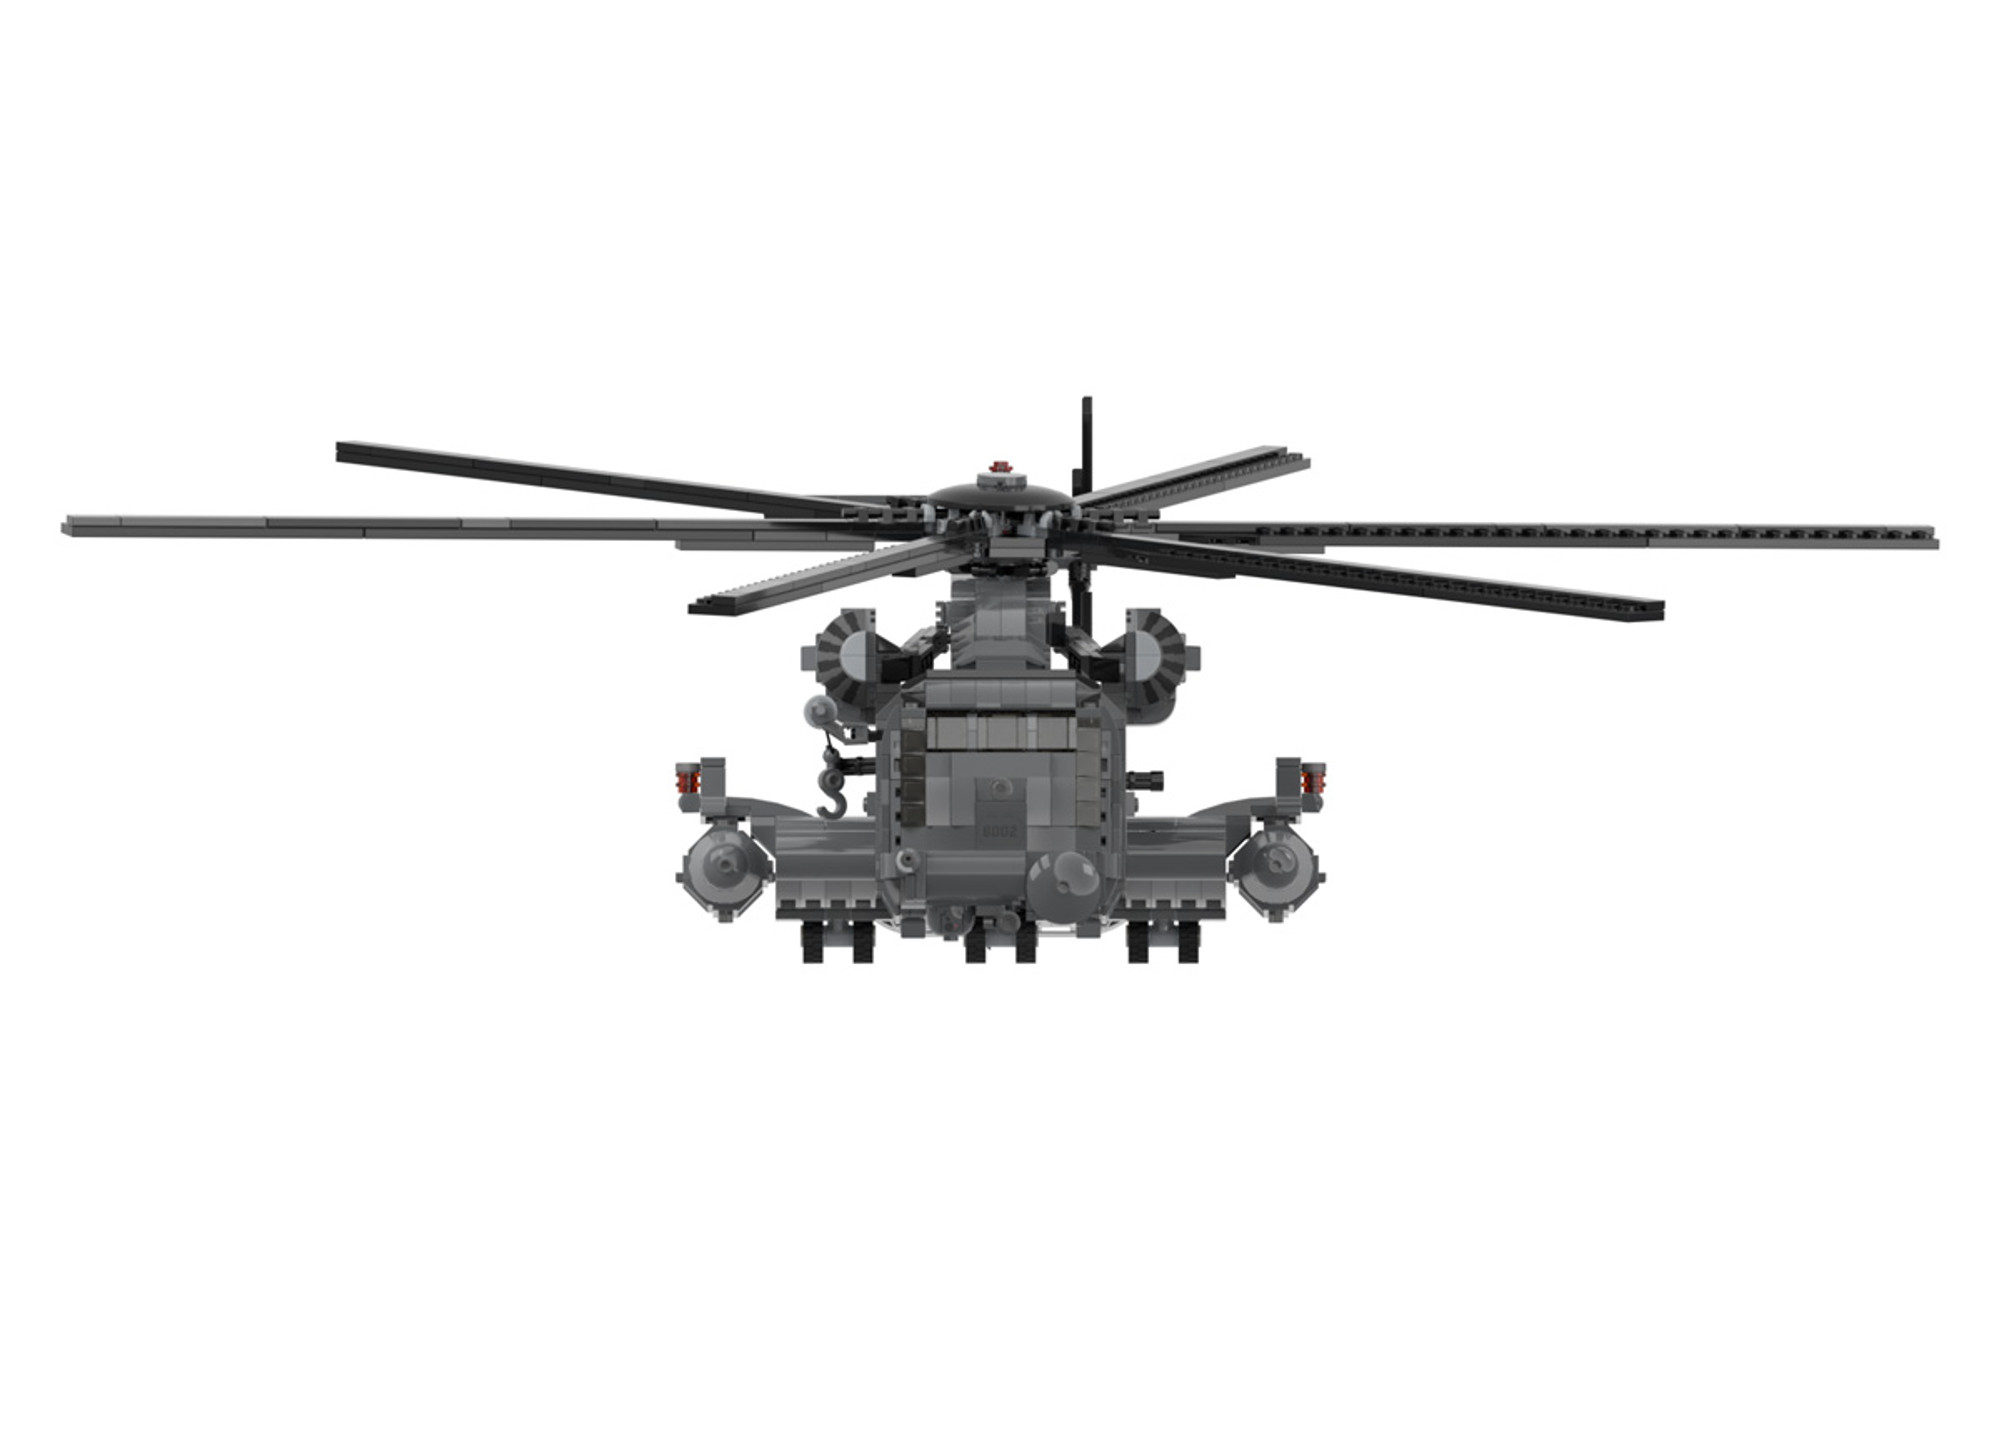 MH-53M Pave Low - Heavy-Lift Helicopter